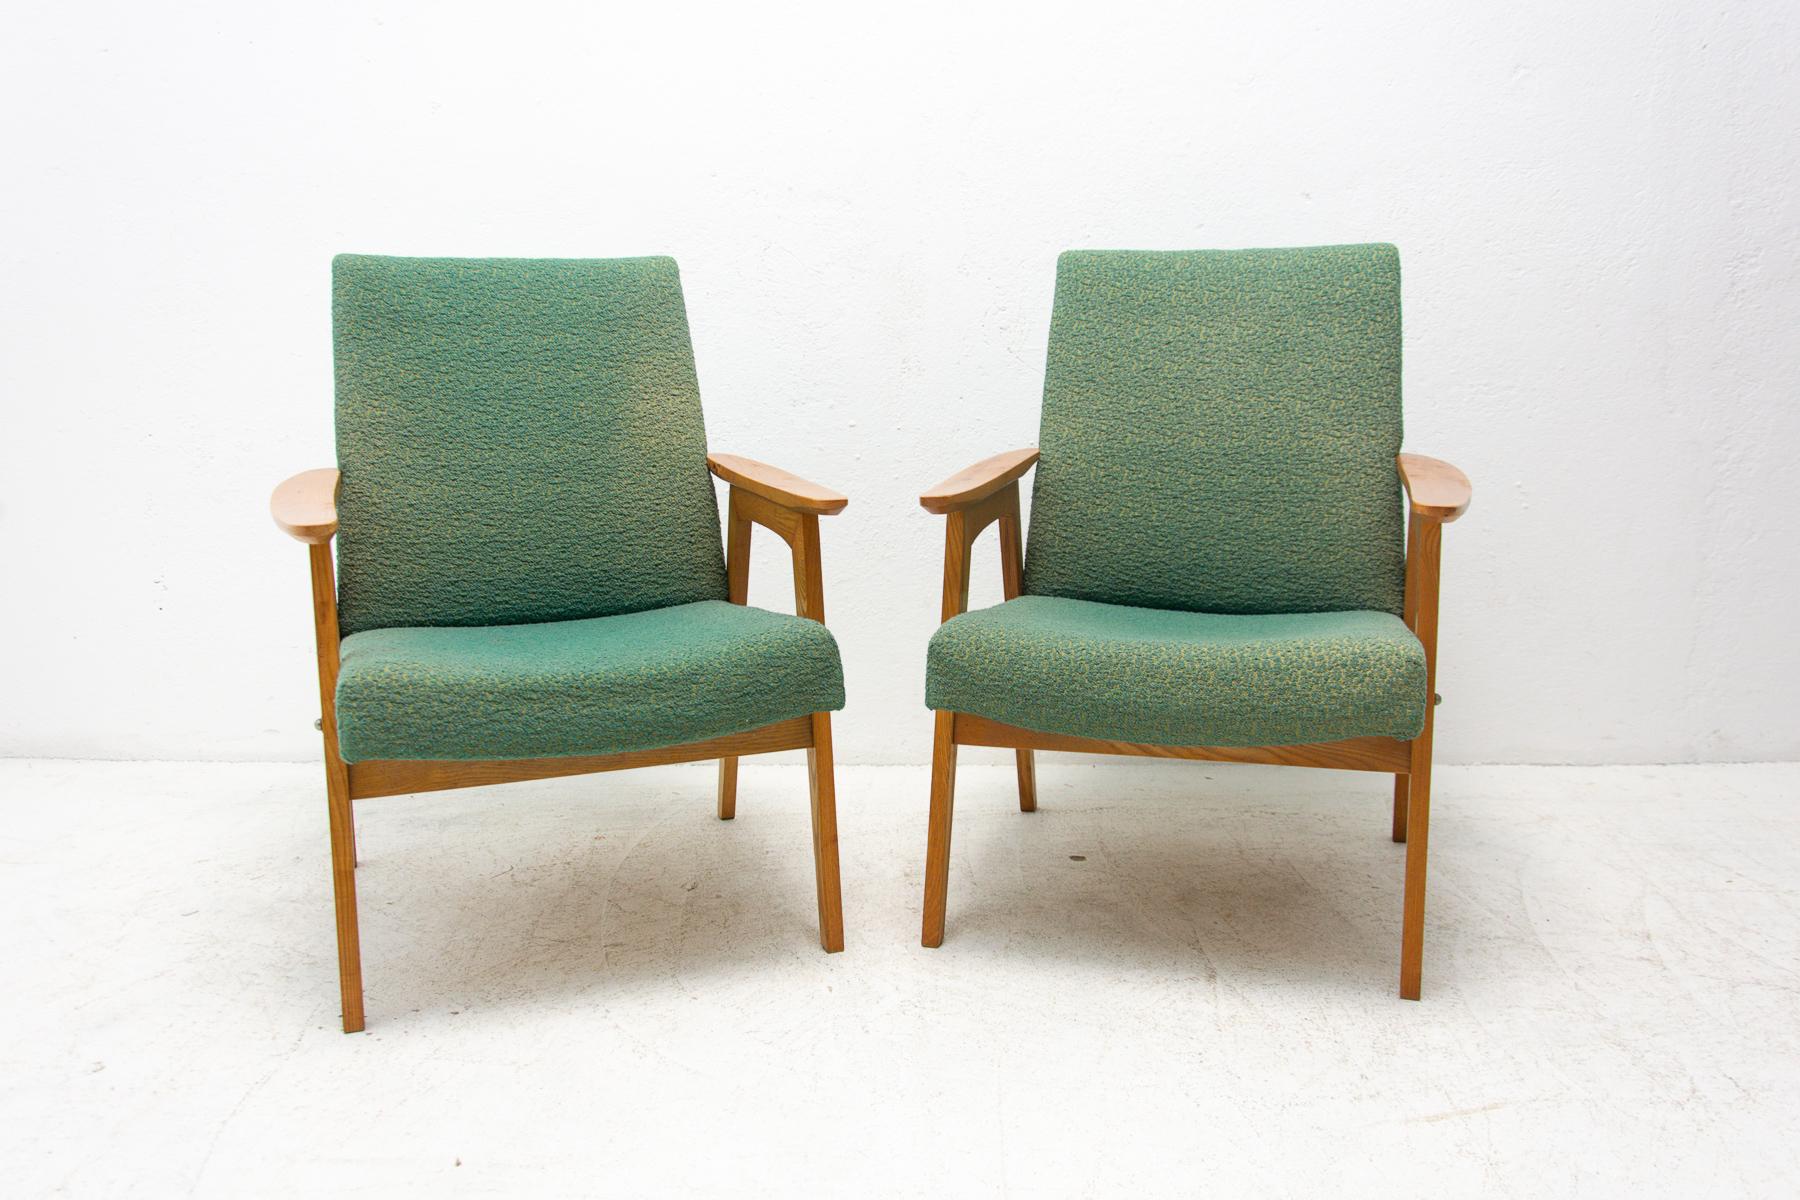 These bentwood armchairs were designed by Jaroslav Šmídek and made in the former Czechoslovakia in the 1960’s.

The chairs are stable and comfortable. They are in good vintage condition, shows signs of age and using (fabric fading on the